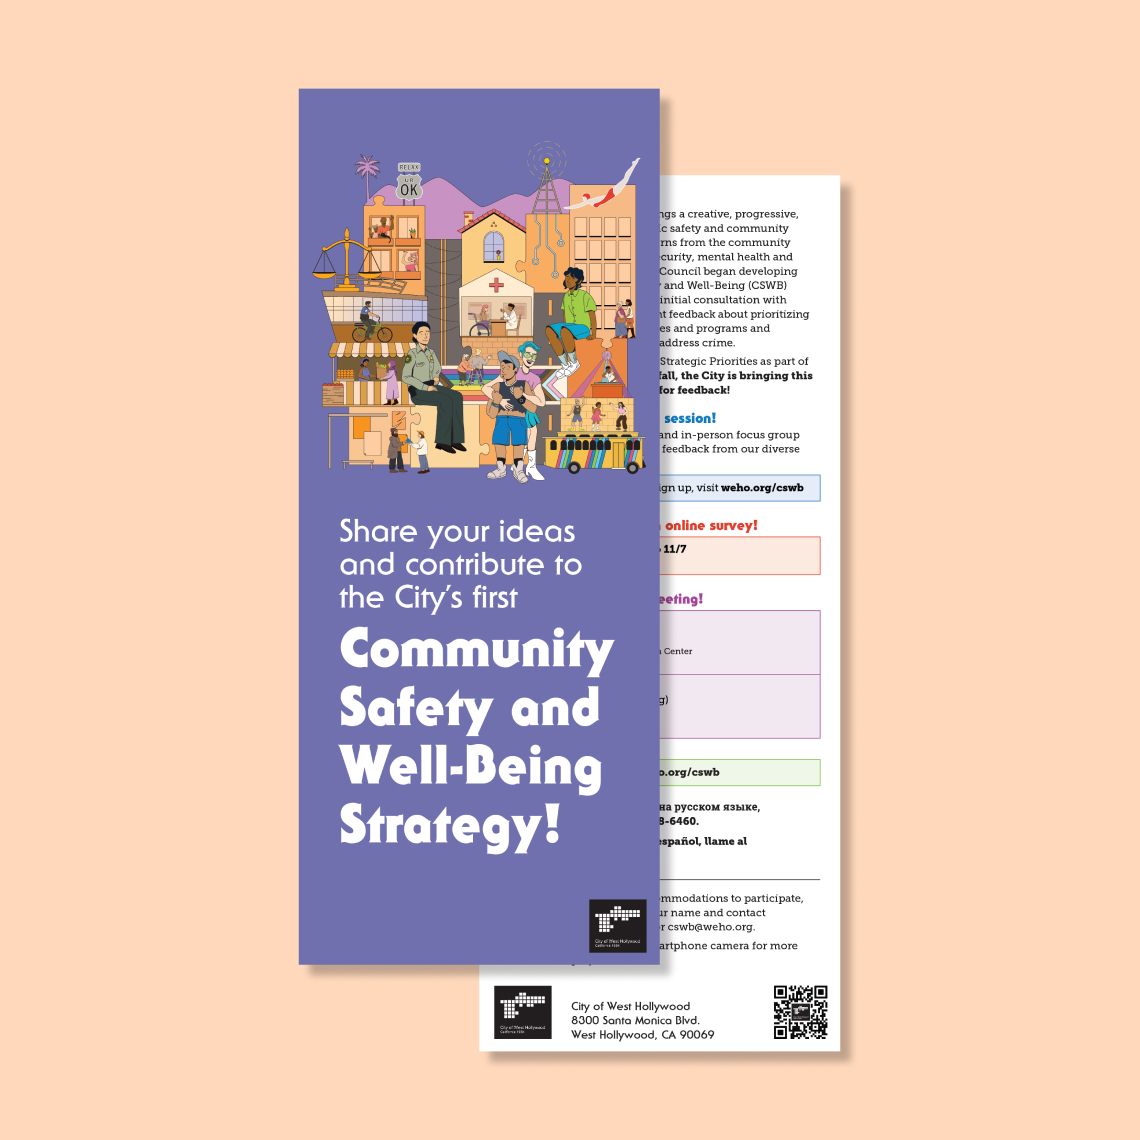 Buckslip from City of West Hollywood (WeHo) Community Safety & Well Being campaign designed by Kilter.